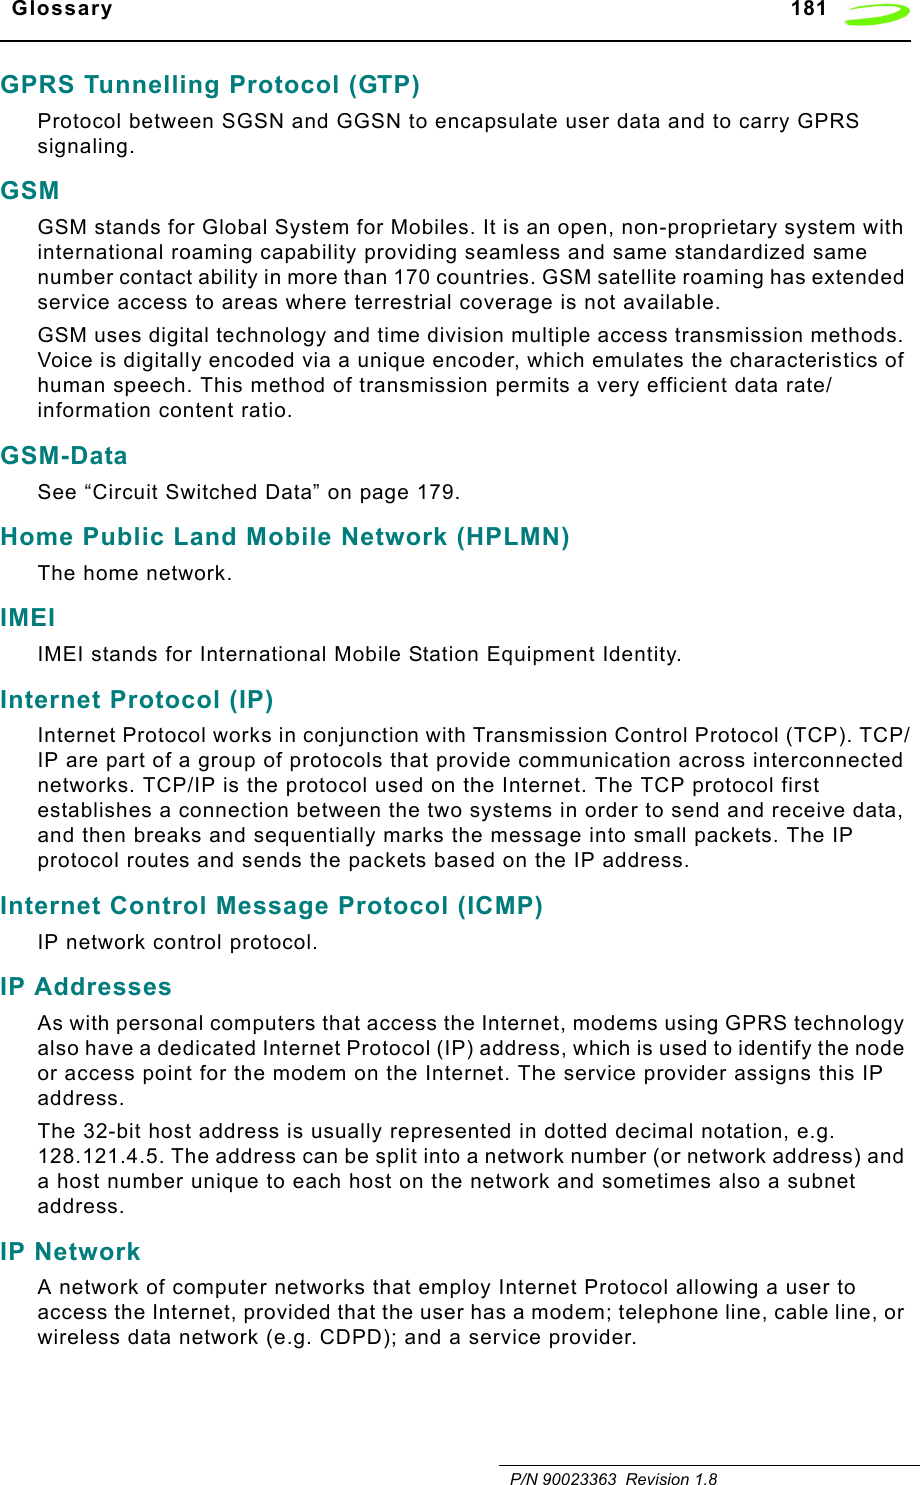   Glossary 181   P/N 90023363  Revision 1.8GPRS Tunnelling Protocol (GTP)Protocol between SGSN and GGSN to encapsulate user data and to carry GPRS signaling.GSMGSM stands for Global System for Mobiles. It is an open, non-proprietary system with international roaming capability providing seamless and same standardized same number contact ability in more than 170 countries. GSM satellite roaming has extended service access to areas where terrestrial coverage is not available.GSM uses digital technology and time division multiple access transmission methods. Voice is digitally encoded via a unique encoder, which emulates the characteristics of human speech. This method of transmission permits a very efficient data rate/information content ratio.GSM-DataSee “Circuit Switched Data” on page 179.Home Public Land Mobile Network (HPLMN)The home network.IMEIIMEI stands for International Mobile Station Equipment Identity.Internet Protocol (IP)Internet Protocol works in conjunction with Transmission Control Protocol (TCP). TCP/IP are part of a group of protocols that provide communication across interconnected networks. TCP/IP is the protocol used on the Internet. The TCP protocol first establishes a connection between the two systems in order to send and receive data, and then breaks and sequentially marks the message into small packets. The IP protocol routes and sends the packets based on the IP address.Internet Control Message Protocol (ICMP)IP network control protocol.IP AddressesAs with personal computers that access the Internet, modems using GPRS technology also have a dedicated Internet Protocol (IP) address, which is used to identify the node or access point for the modem on the Internet. The service provider assigns this IP address. The 32-bit host address is usually represented in dotted decimal notation, e.g. 128.121.4.5. The address can be split into a network number (or network address) and a host number unique to each host on the network and sometimes also a subnet address.IP NetworkA network of computer networks that employ Internet Protocol allowing a user to access the Internet, provided that the user has a modem; telephone line, cable line, or wireless data network (e.g. CDPD); and a service provider.